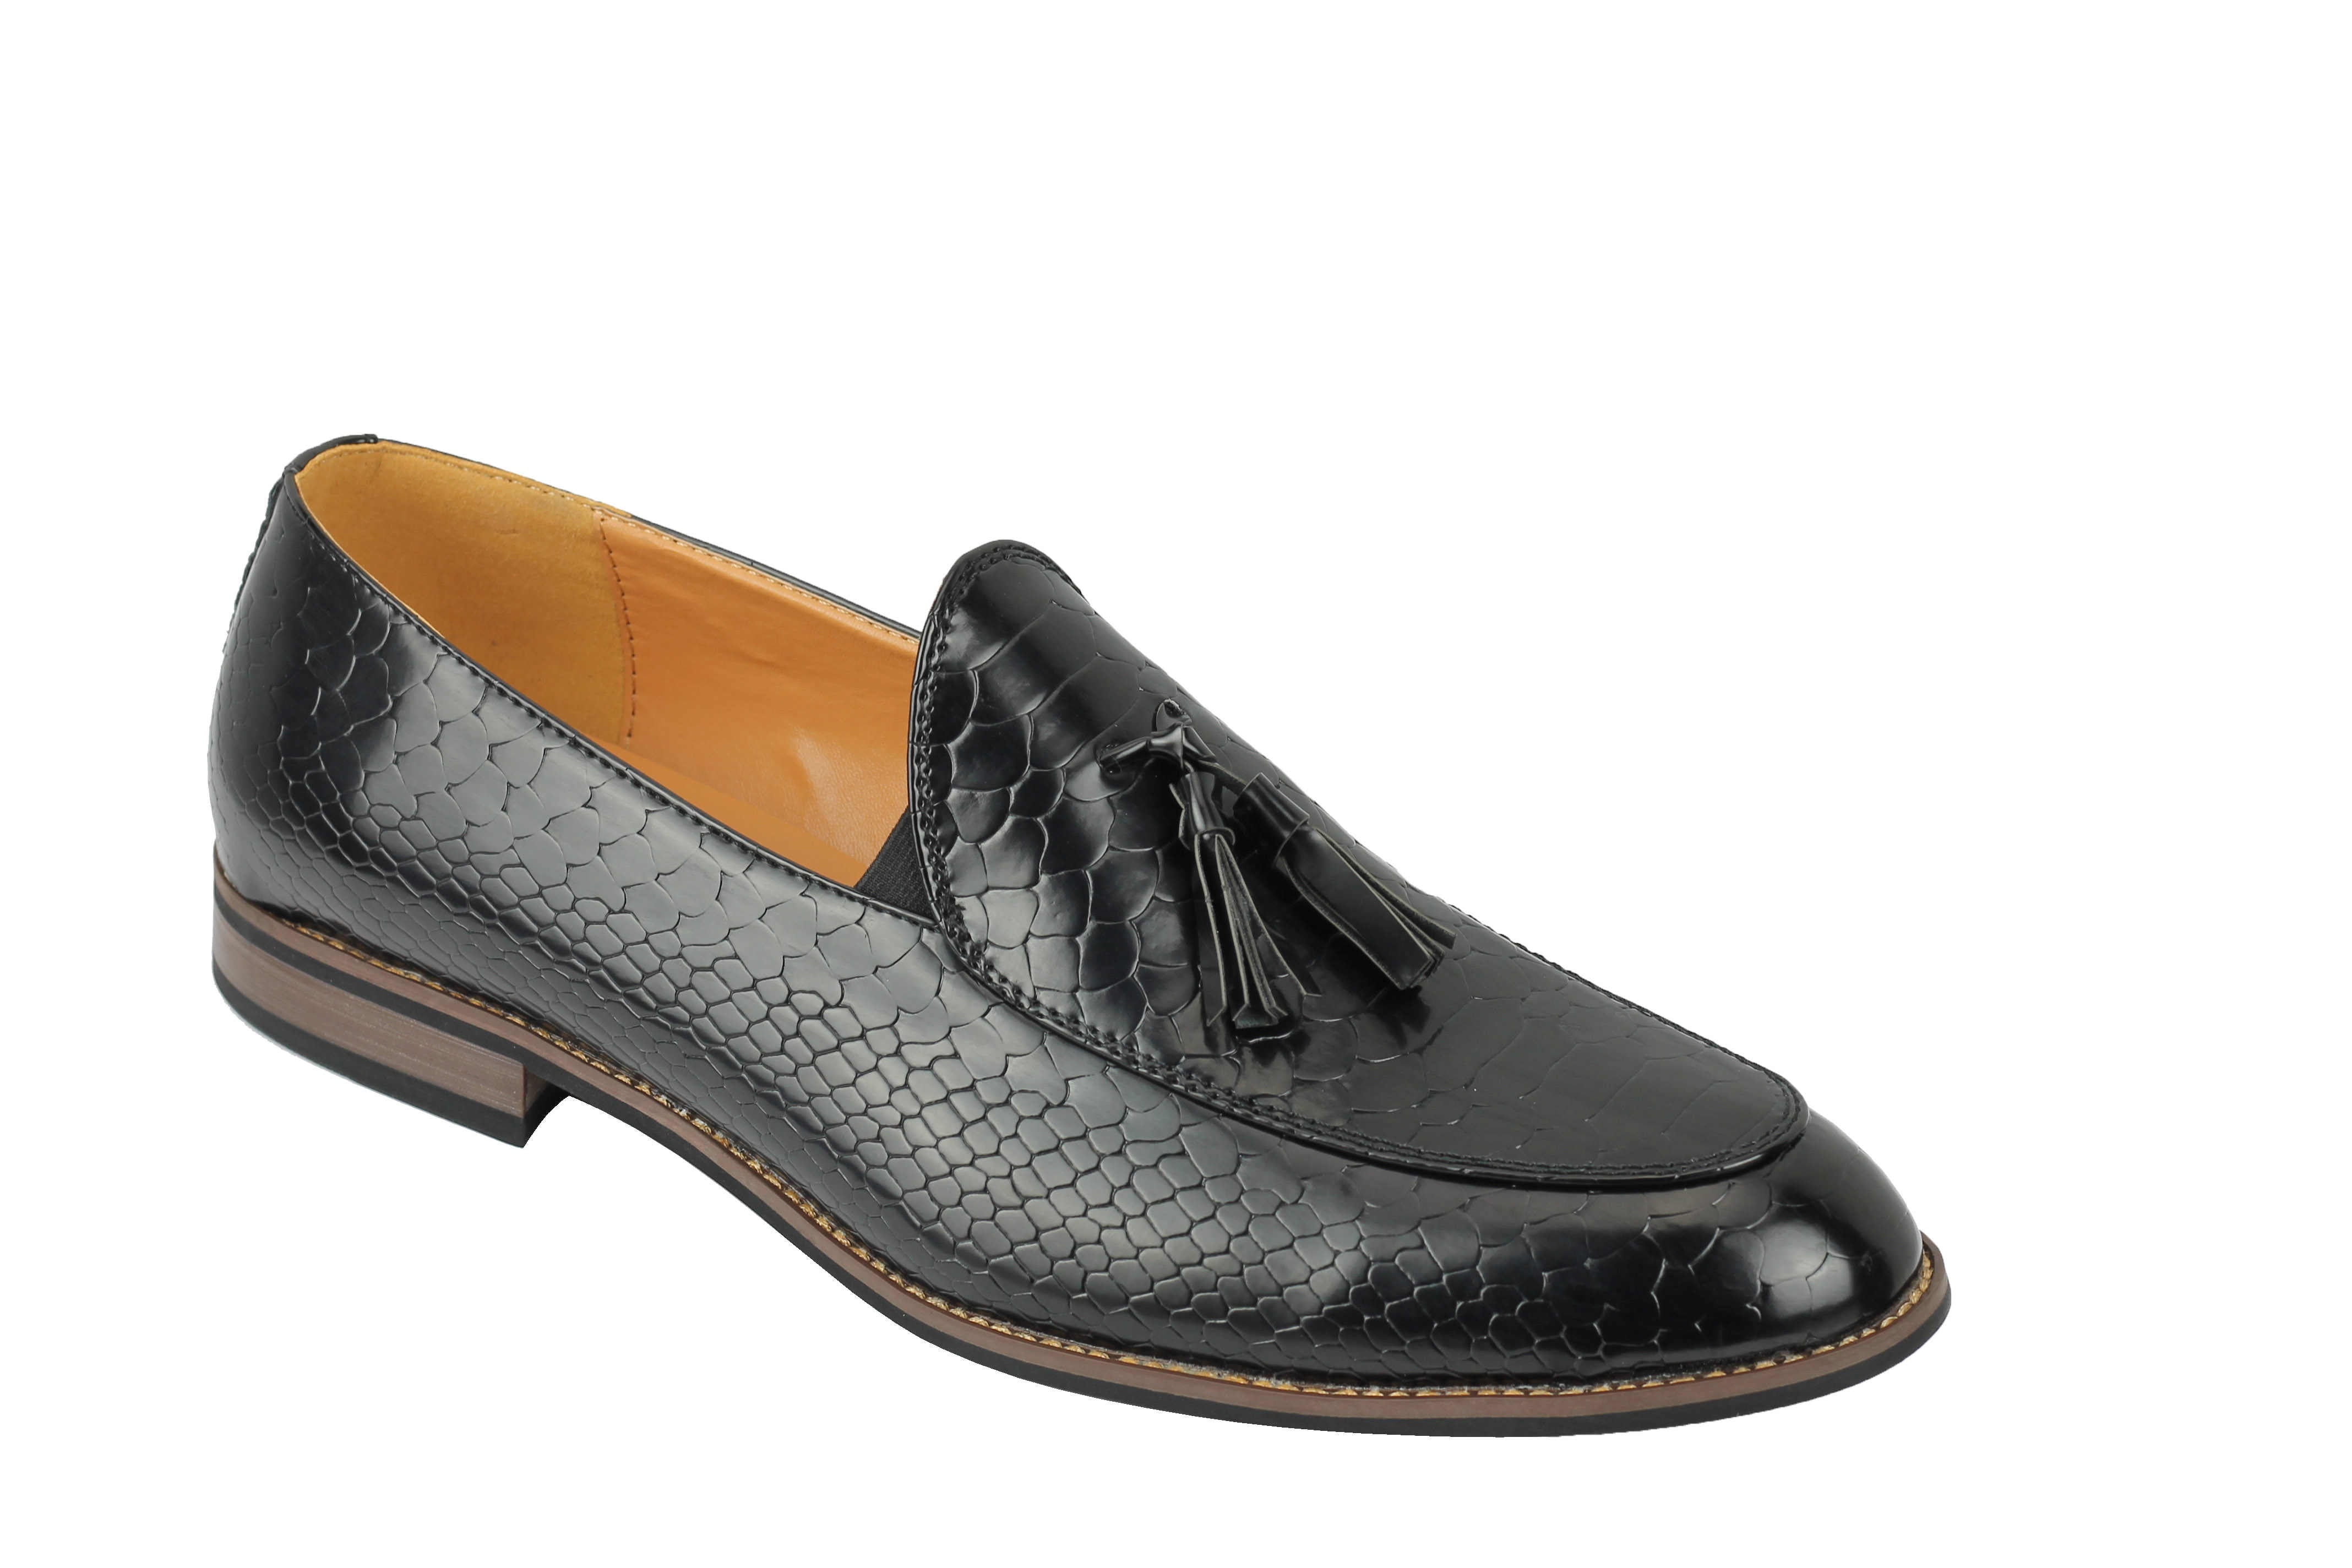 SHINY FAUX LEATHER PRINTED TASSEL LOAFERS